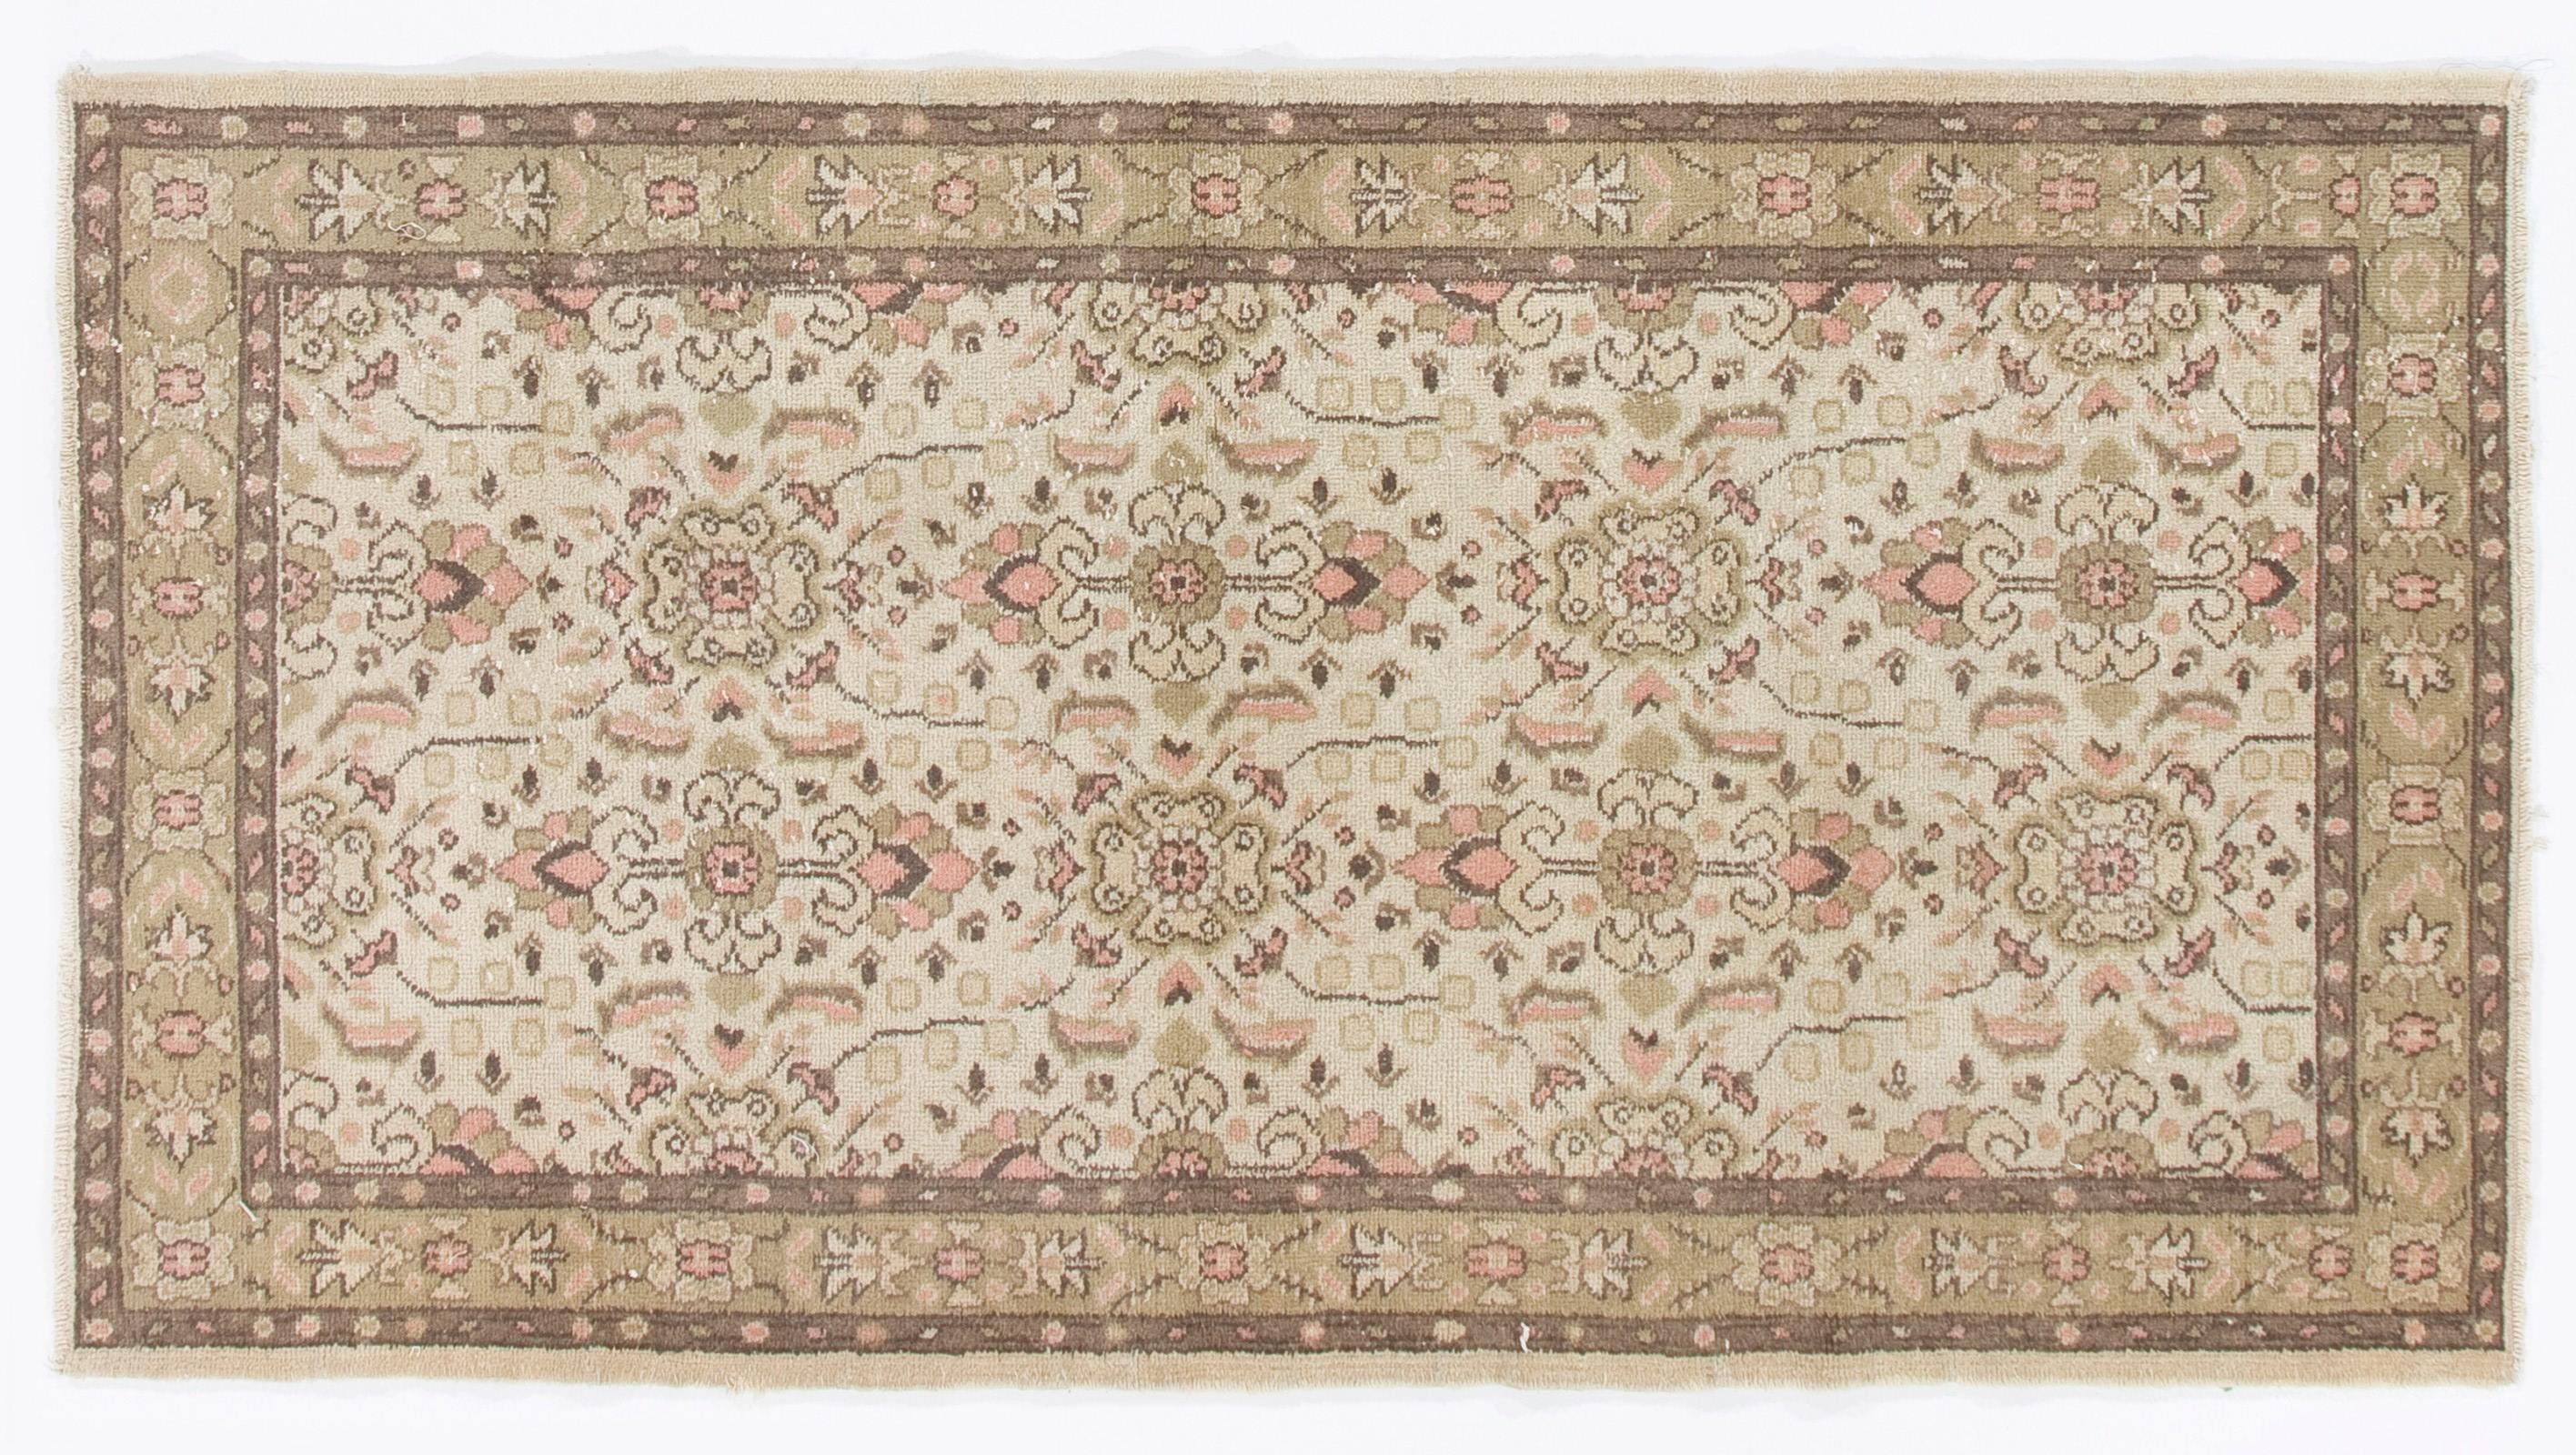 Hand-Woven 3.7x6.8 Ft Vintage Anatolian Wool Rug in Beige, Faded Green, Soft Pink and Brown For Sale